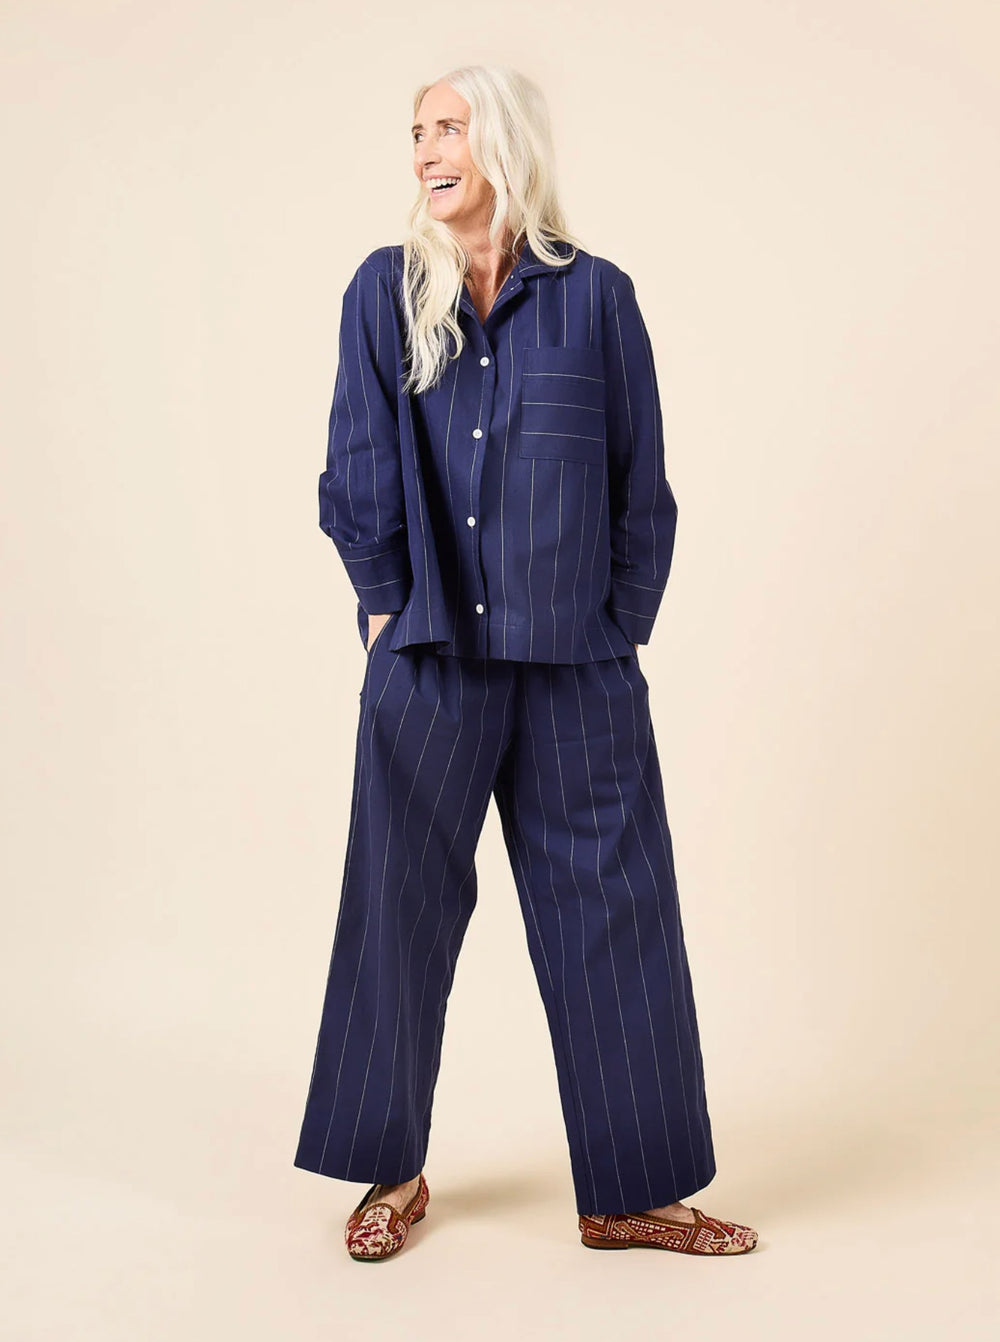 Woman wearing the Fran Pajamas sewing pattern from Closet Core Patterns on The Fold Line. A pyjama pattern made in broadcloth, voile, poplin, chambray, cotton flannel, linen, silk crepe de chine, satin, rayon challis or viscose fabrics, featuring a relaxe